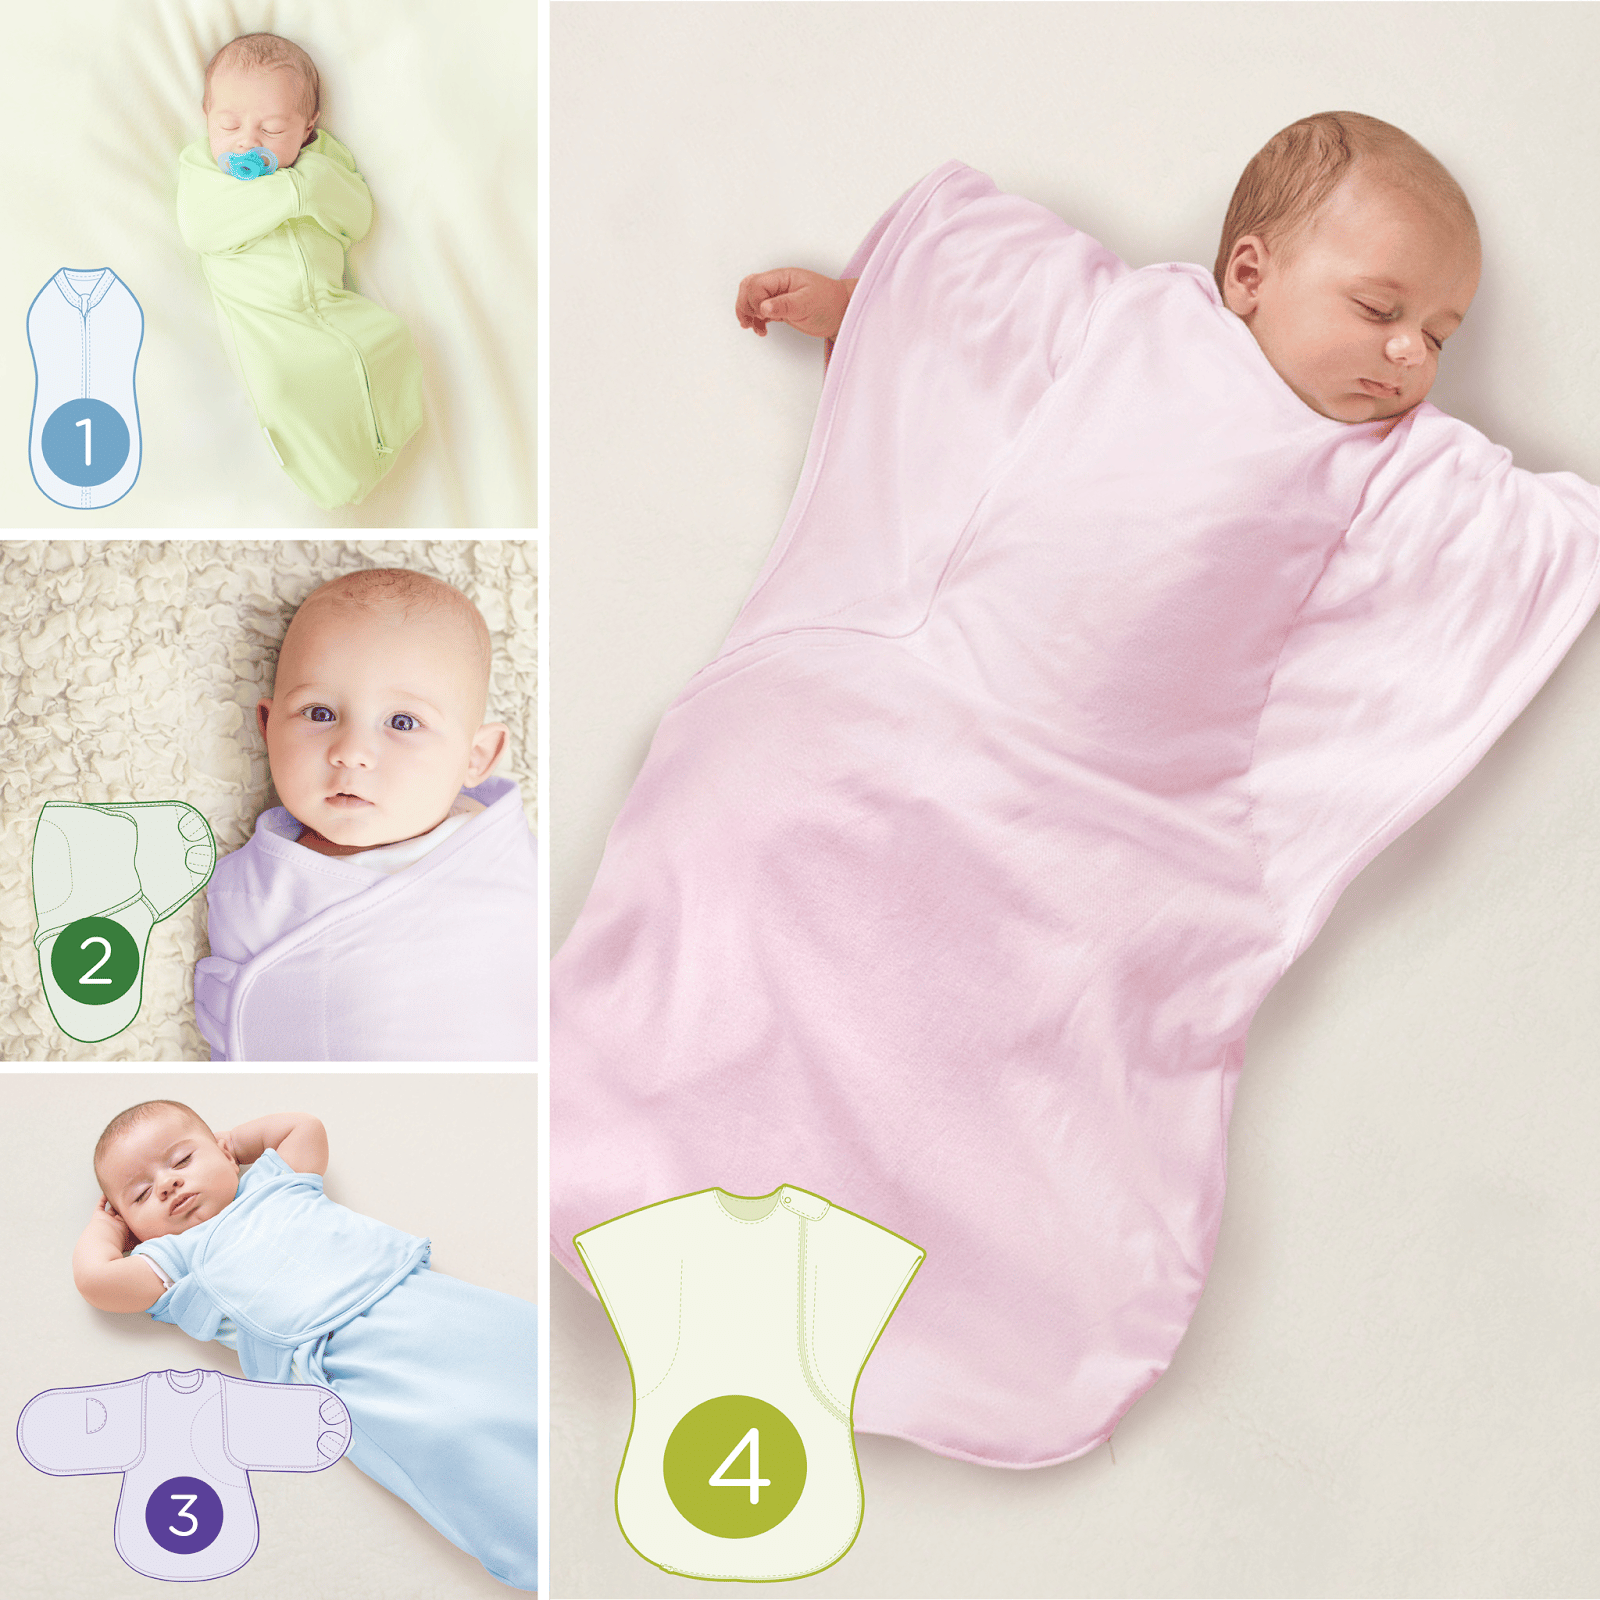 McKinney Mommas: 4 Stages of #SwaddleMe by Summer Infant + #Giveaway